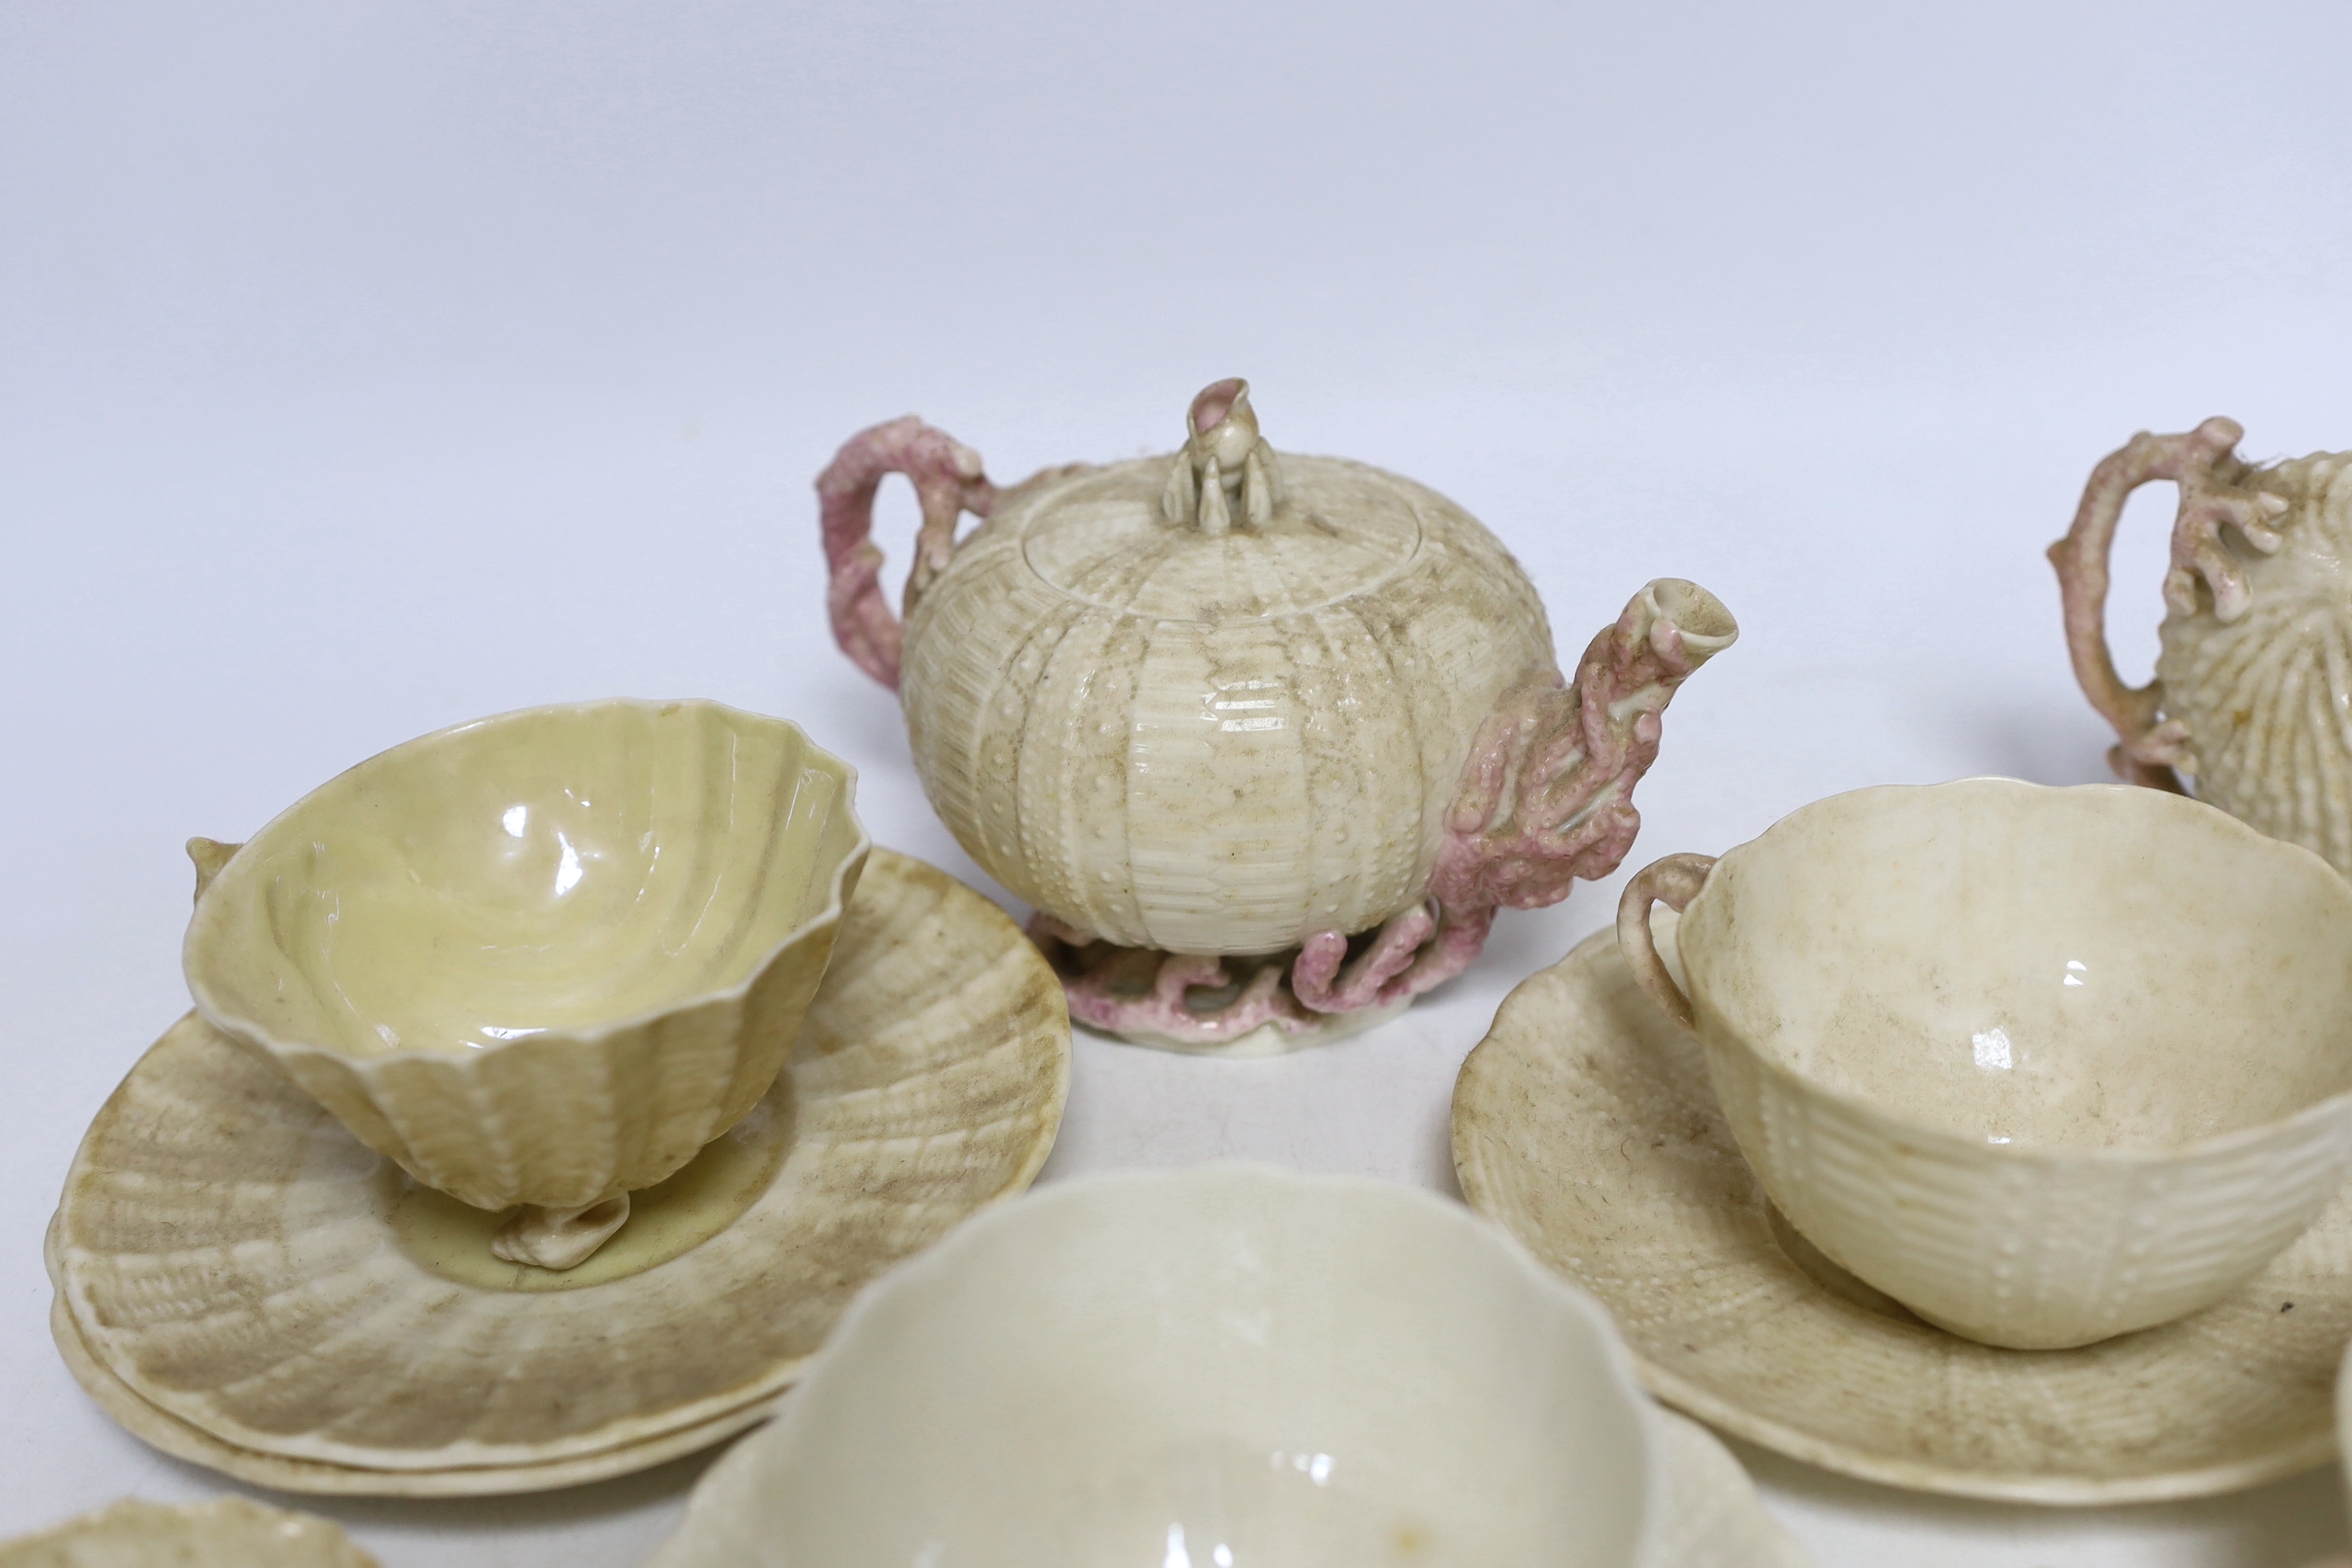 A quantity of Belleek including a teapot, three cups and saucers and a shell design vase, mostly first period